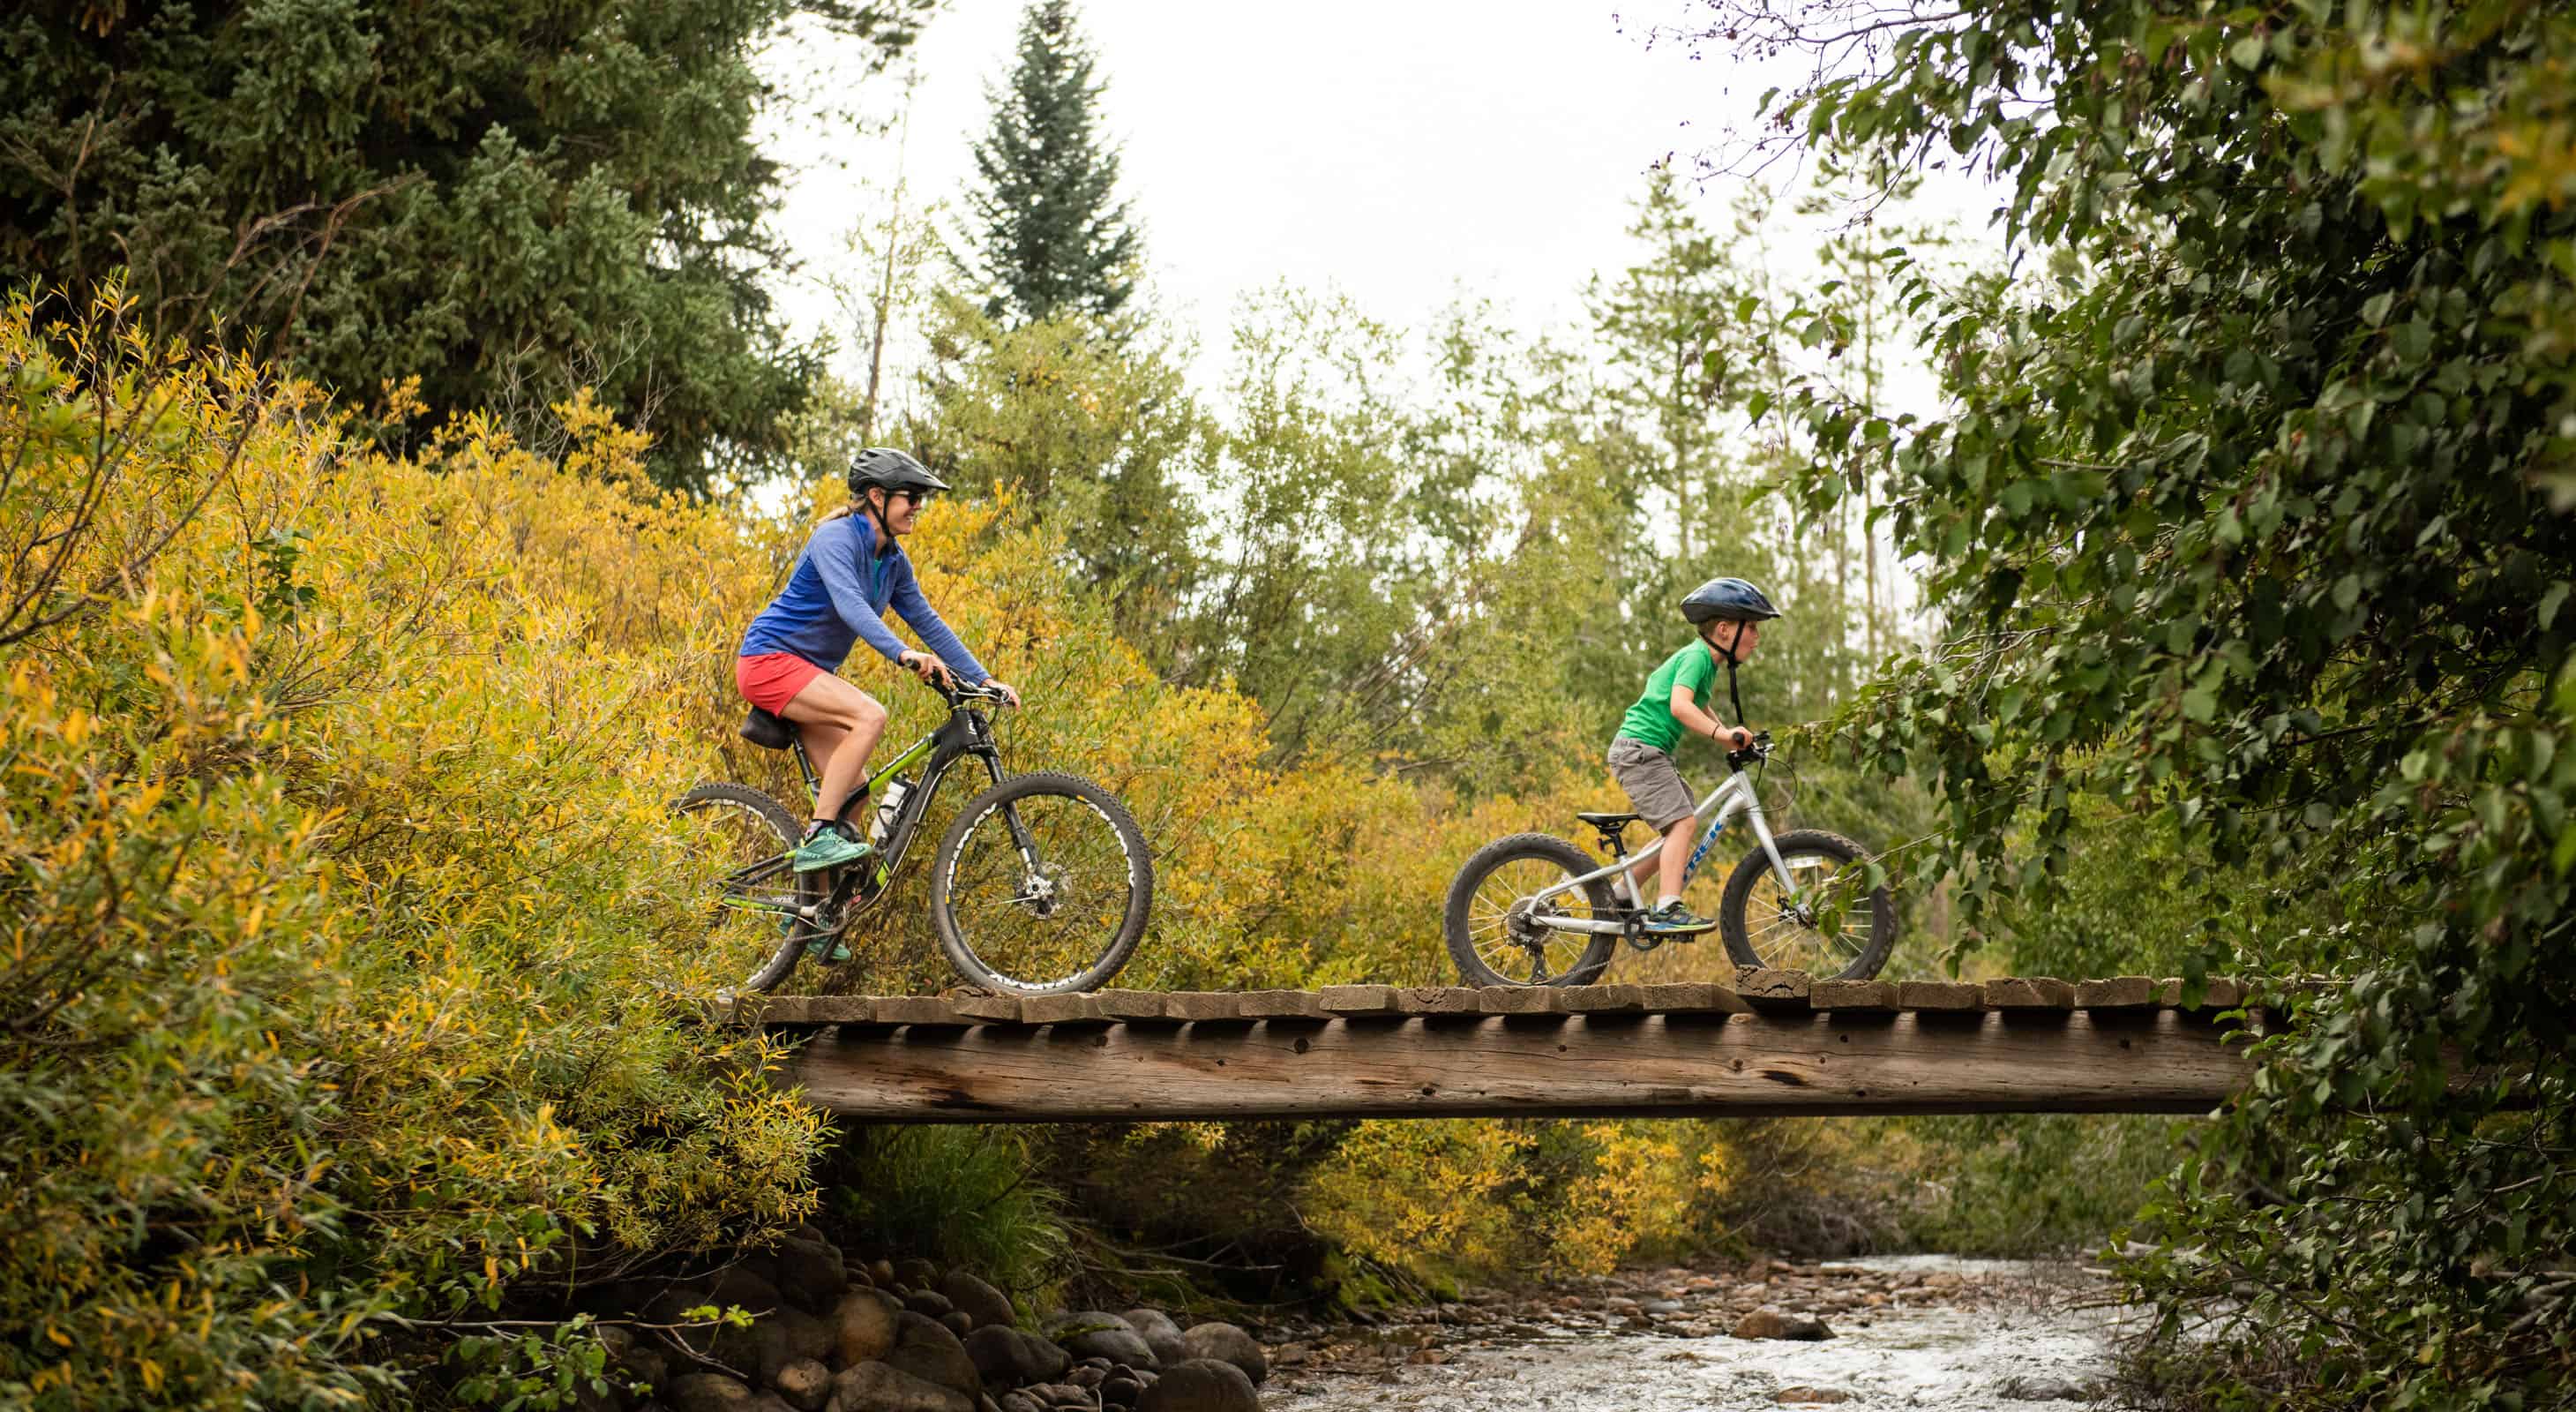 Bike riding - things to do in Fraser CO